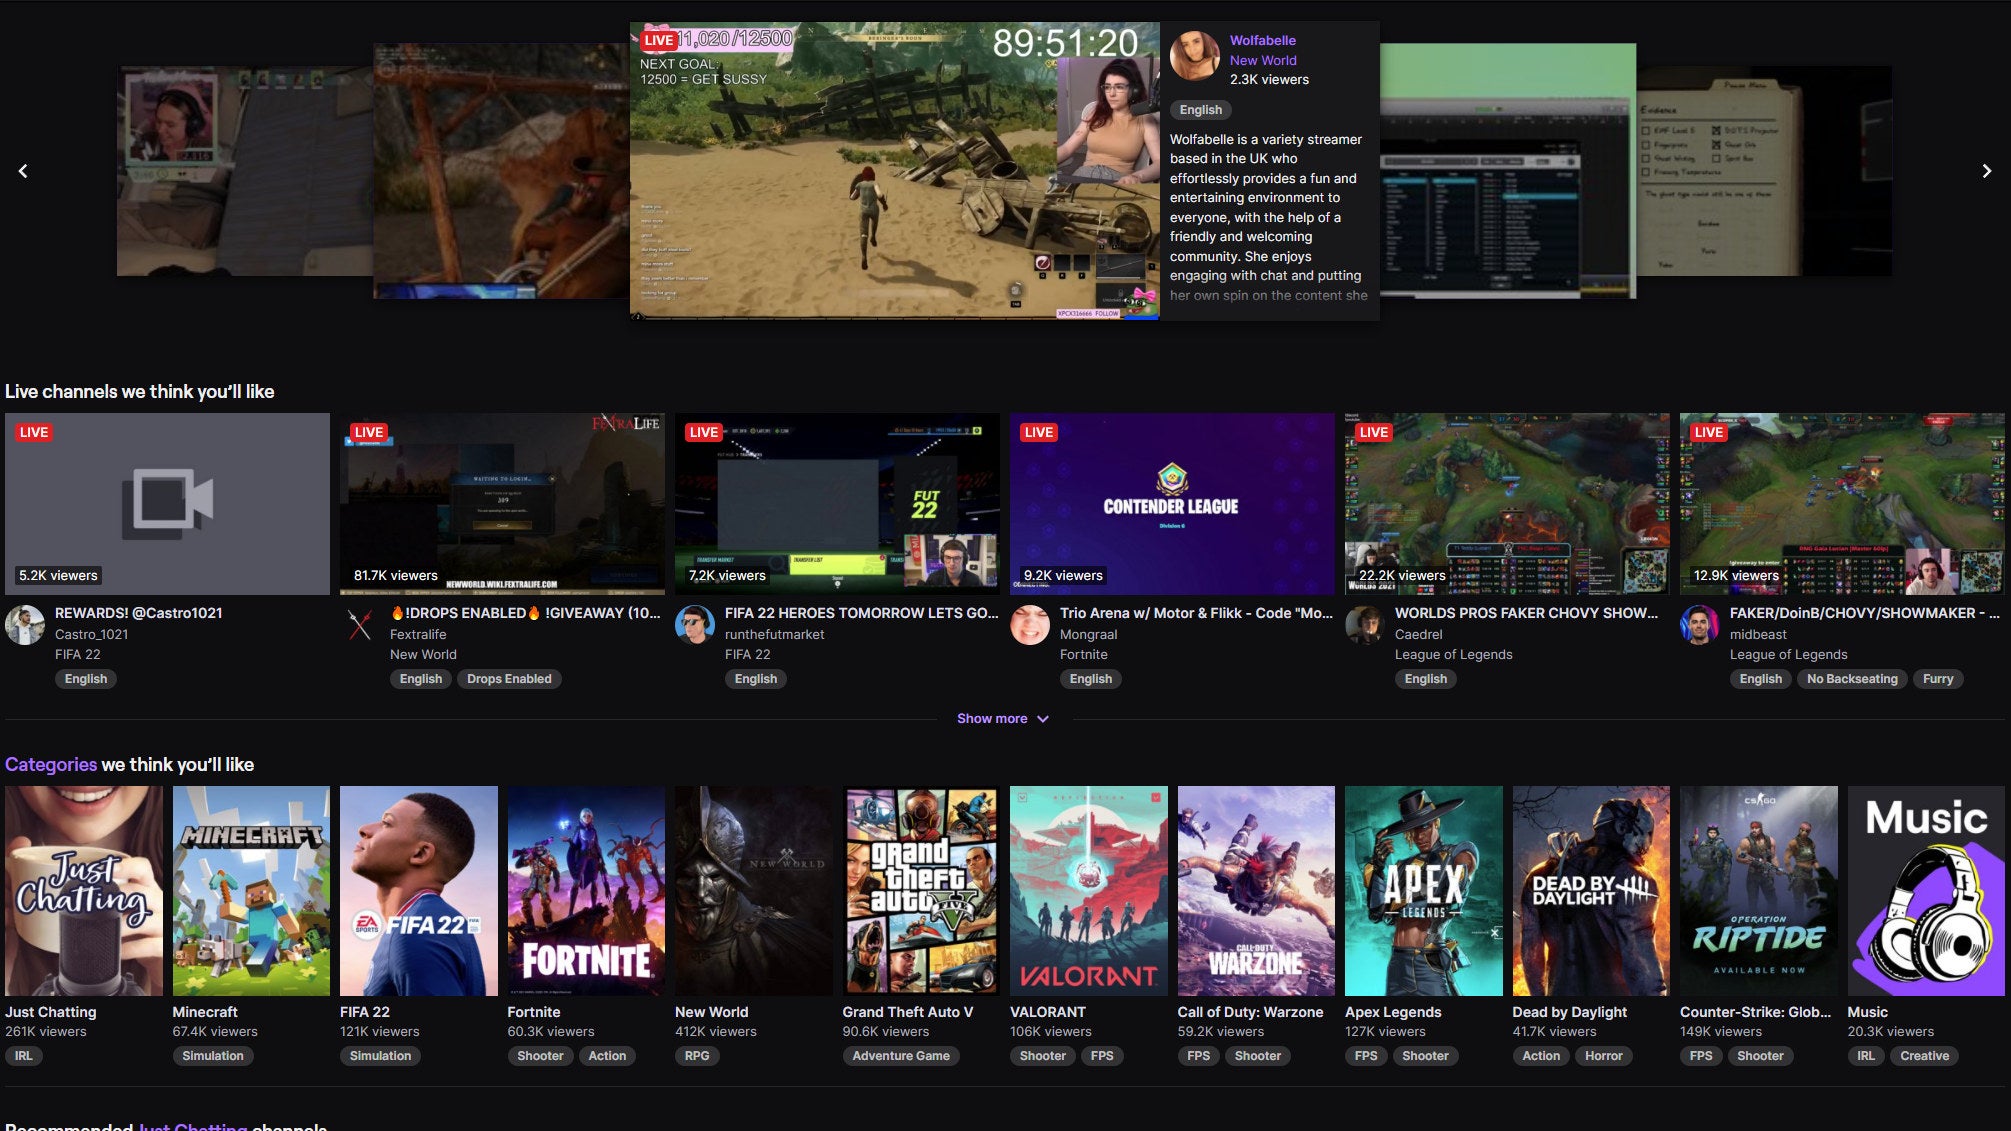 A screenshot of the Twitch homepage.